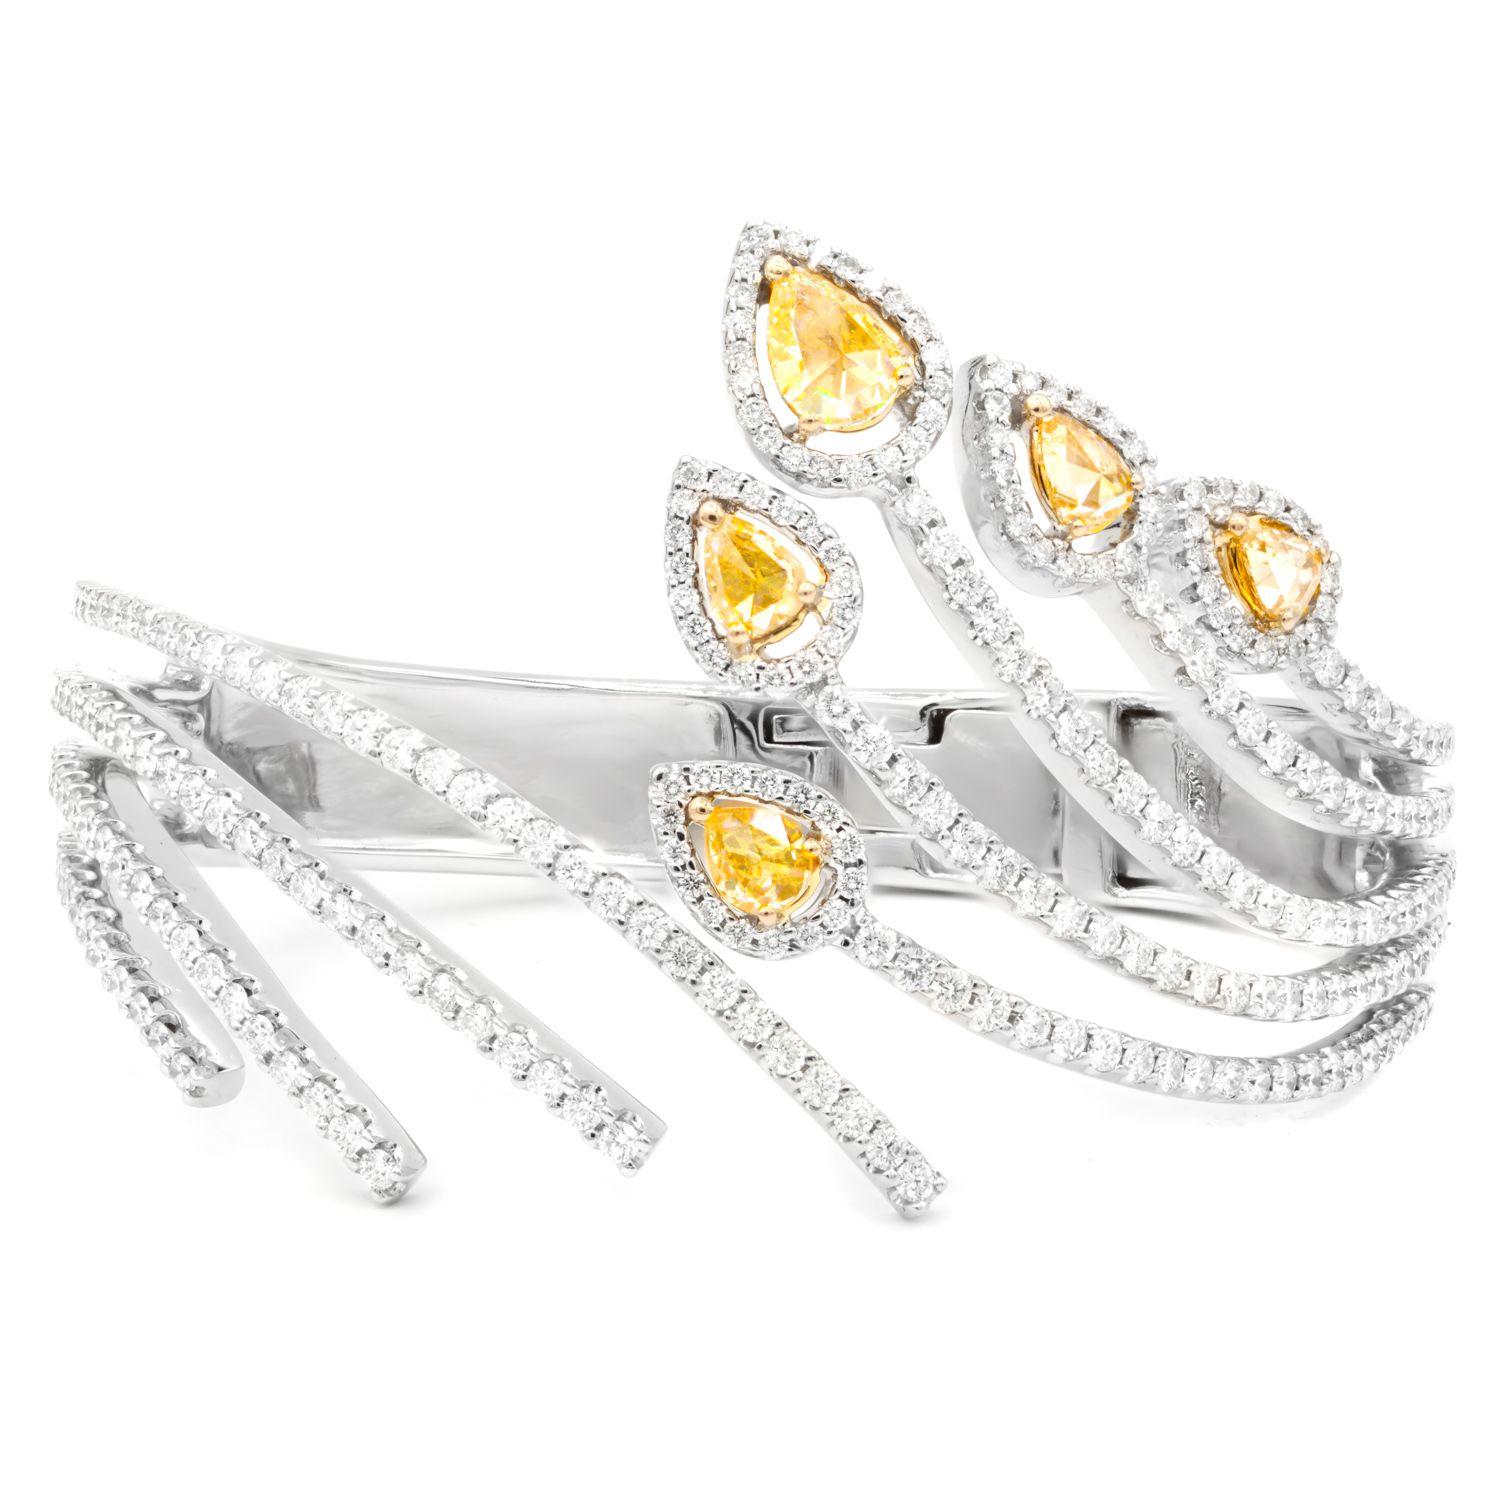 18 kt white gold diamond spiral bangle lined with white diamonds and yellow diamonds in a leaf design totaling 8.00 cts tw of diamonds